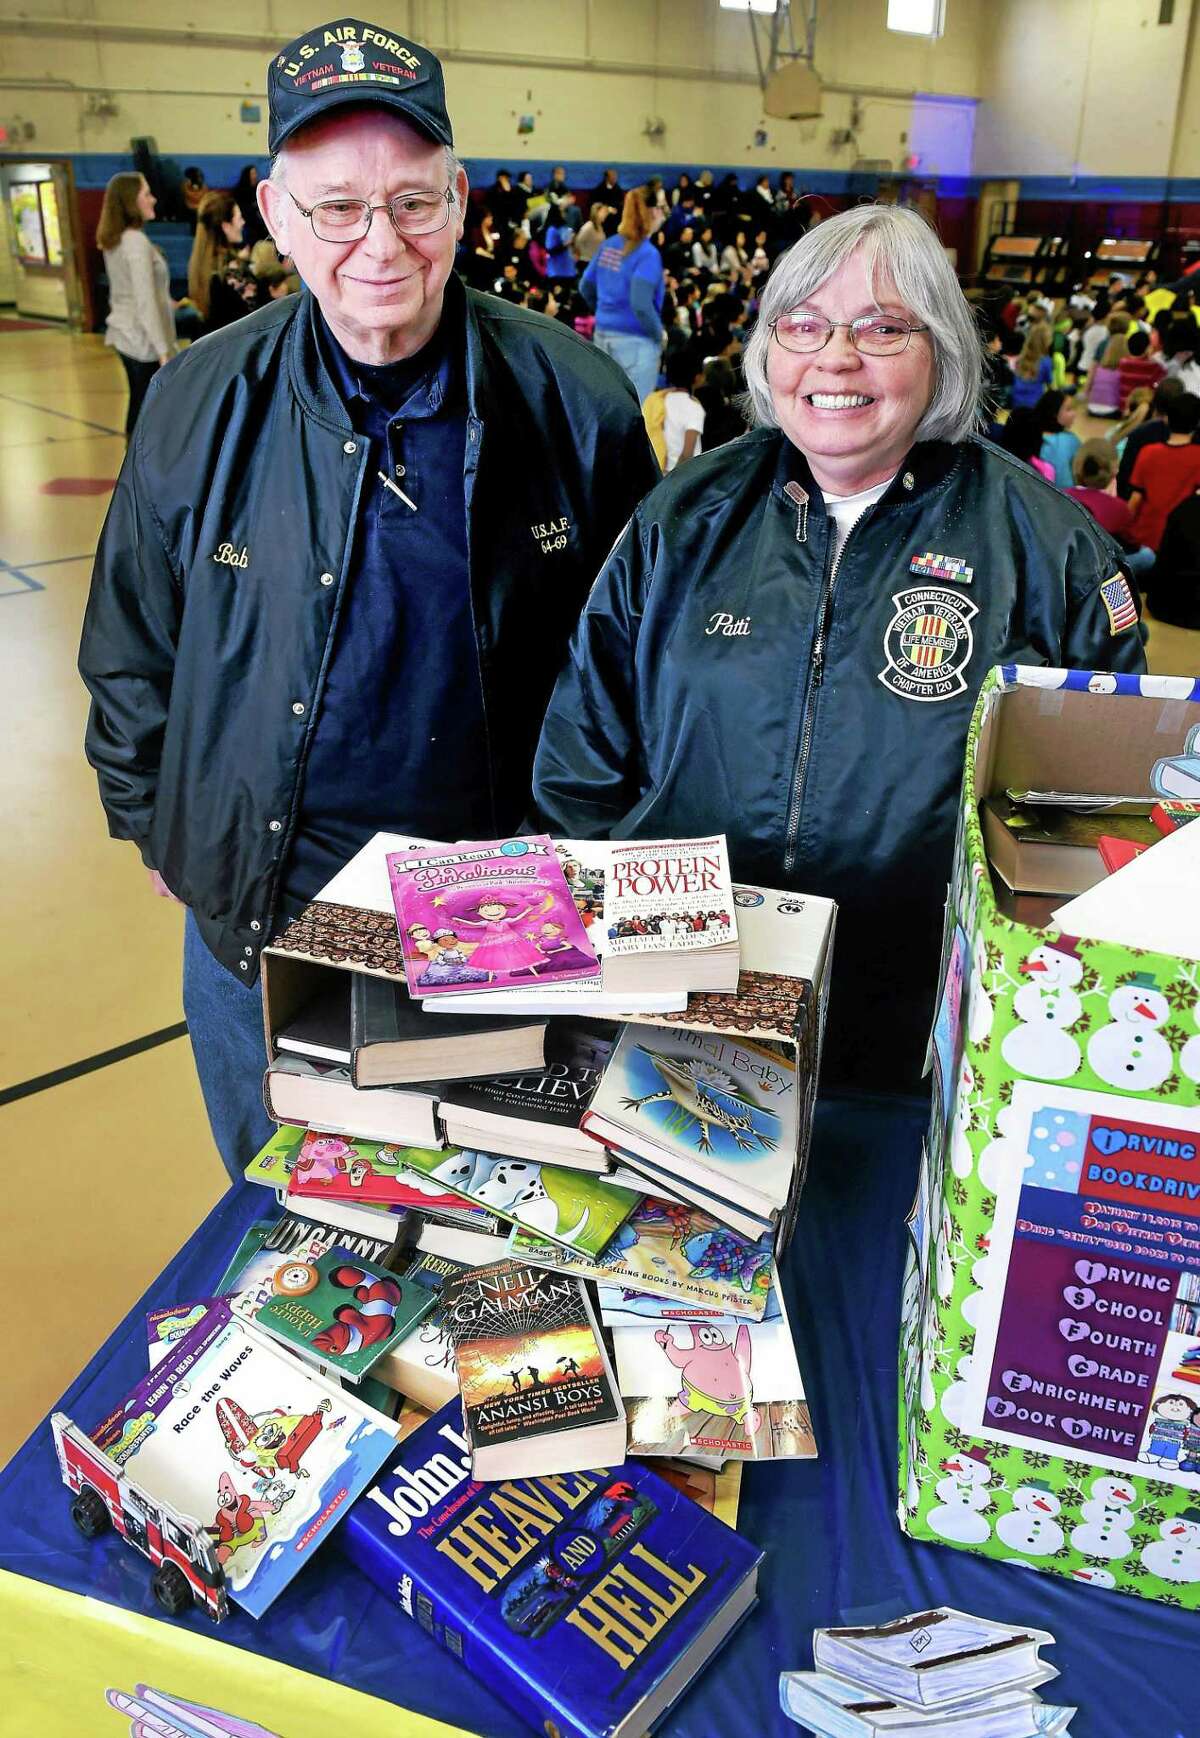 Robert Chechoski, left, of Vietnam Veterans of America Chapter 251 and Patricia Dumin, state council president of the Vietnam Veterans of America, are photographed Wednesday at a book drive coordinated by fourth-graders at Irving School in Derby.